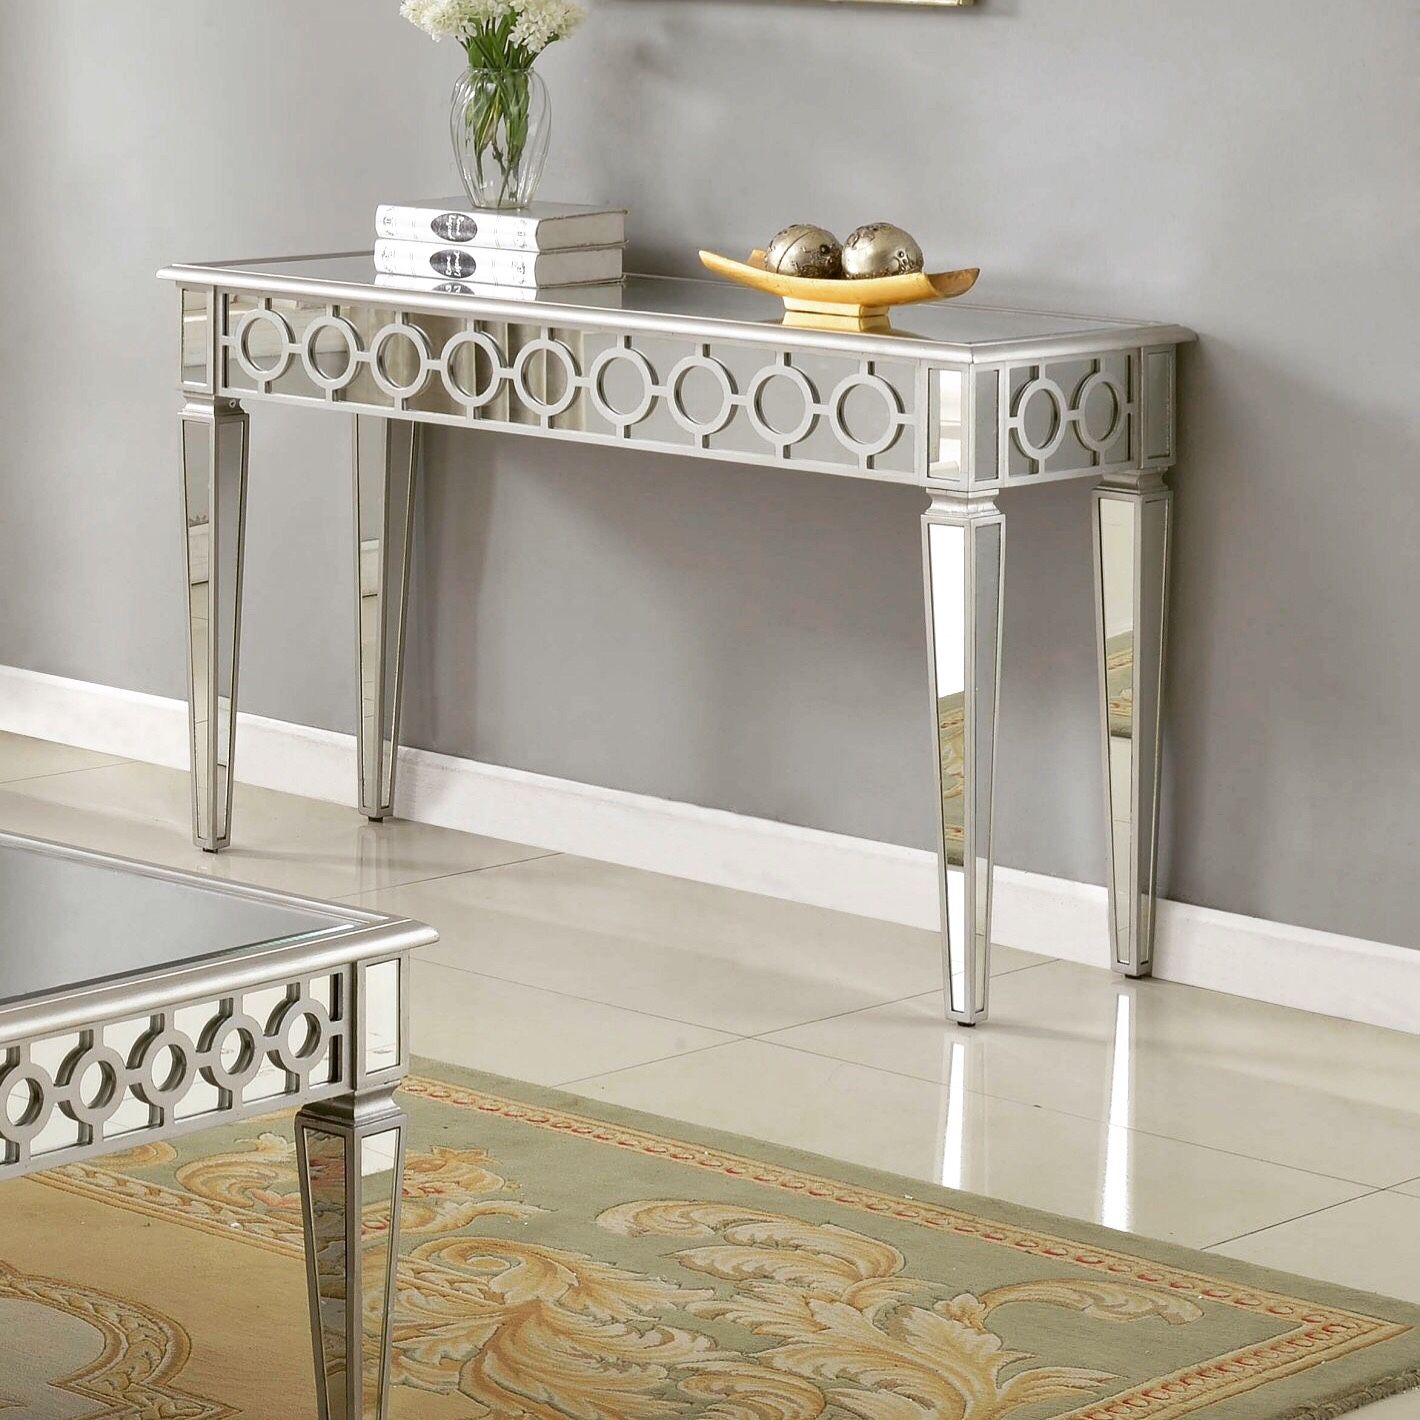 Brand new Sophie mirrored console table